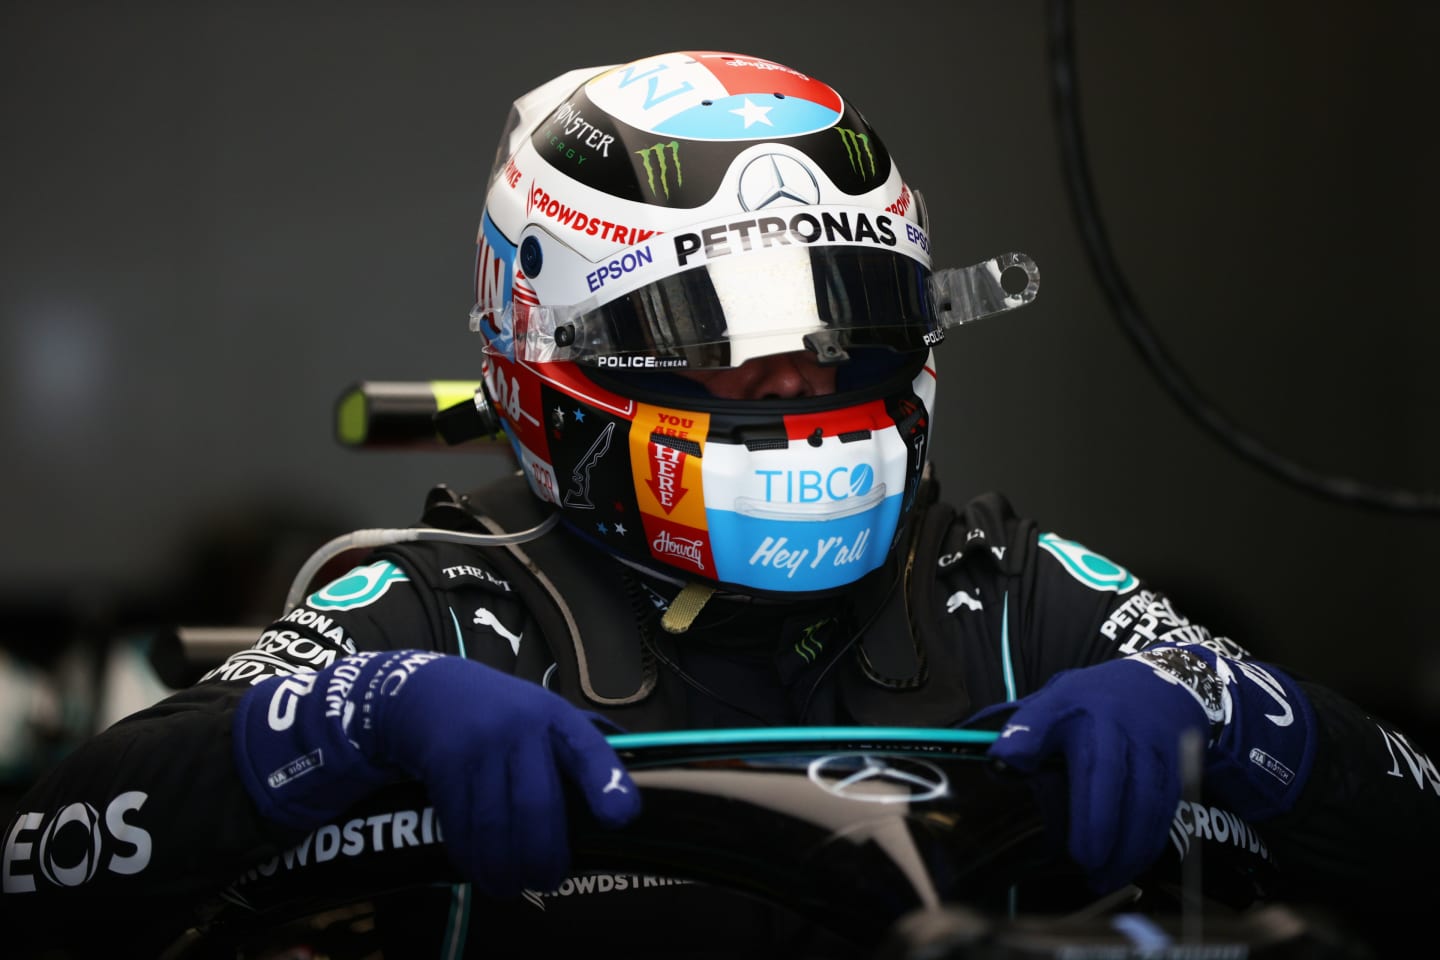 AUSTIN, TEXAS - OCTOBER 23: Valtteri Bottas of Finland and Mercedes GP prepares to drive in the garage during final practice ahead of the F1 Grand Prix of USA at Circuit of The Americas on October 23, 2021 in Austin, Texas. (Photo by Chris Graythen/Getty Images)